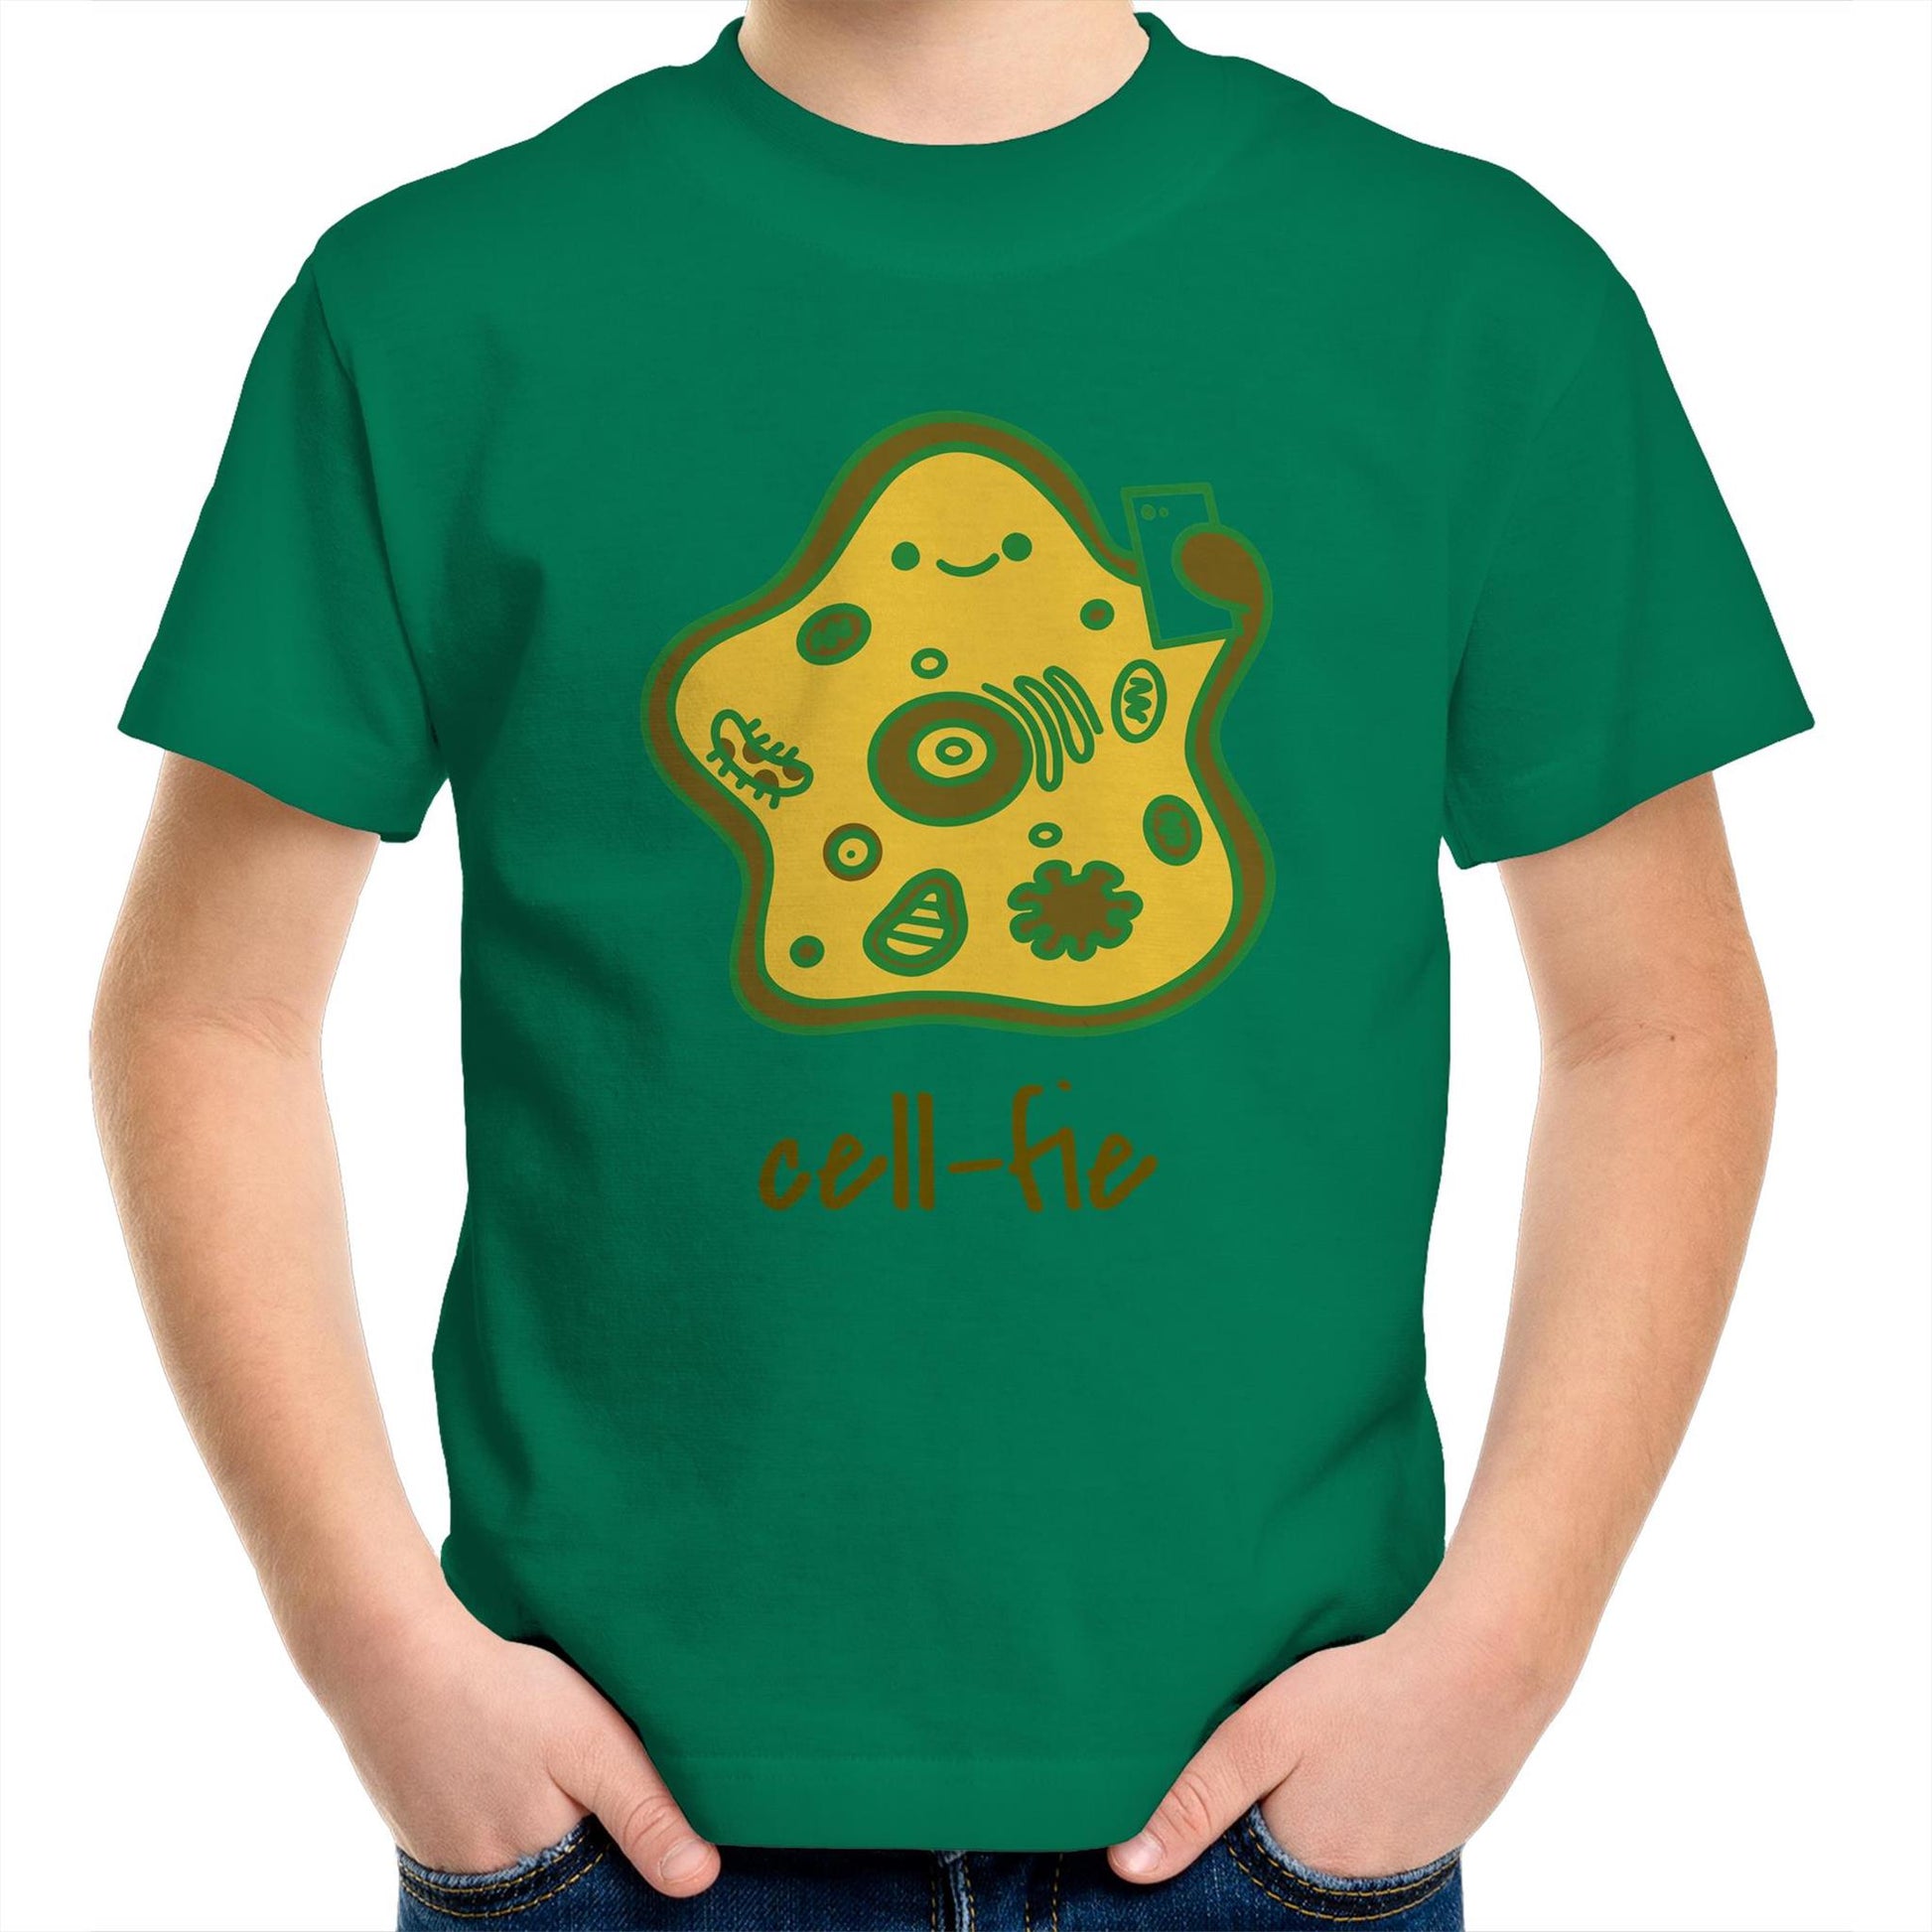 Cell-fie - Kids Youth Crew T-Shirt Kelly Green Kids Youth T-shirt Science